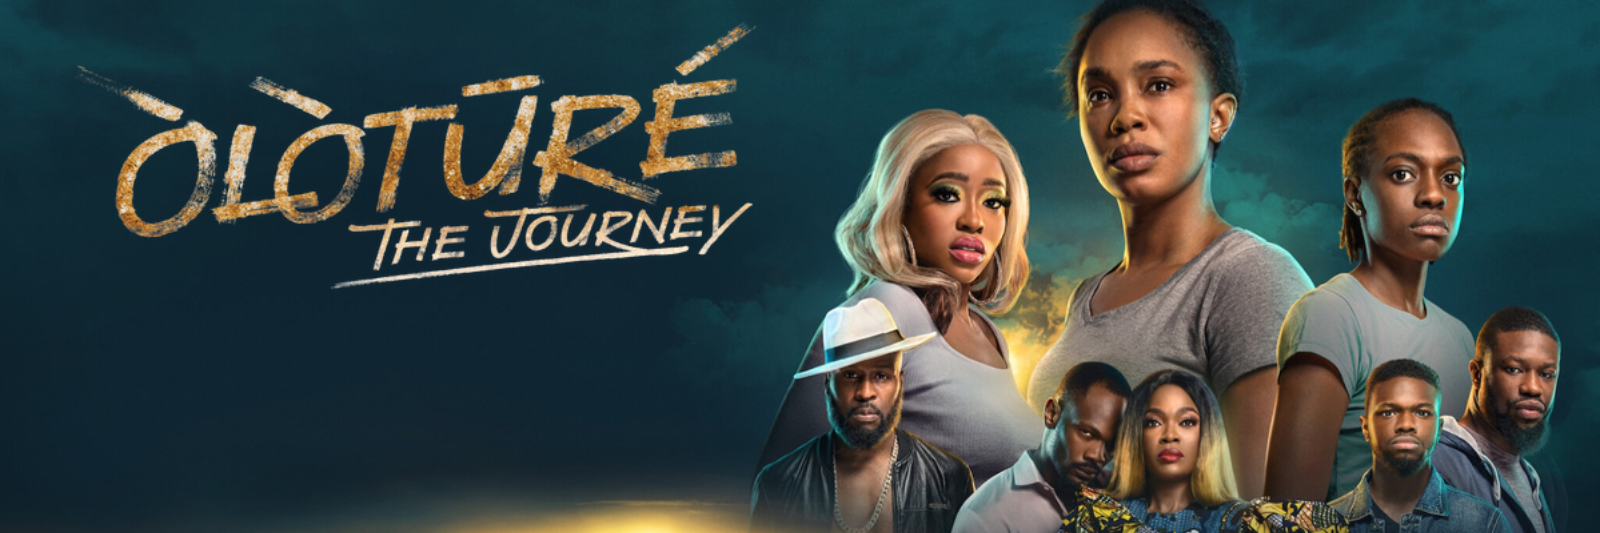 Oloture: The Journey S01 (Complete) 1